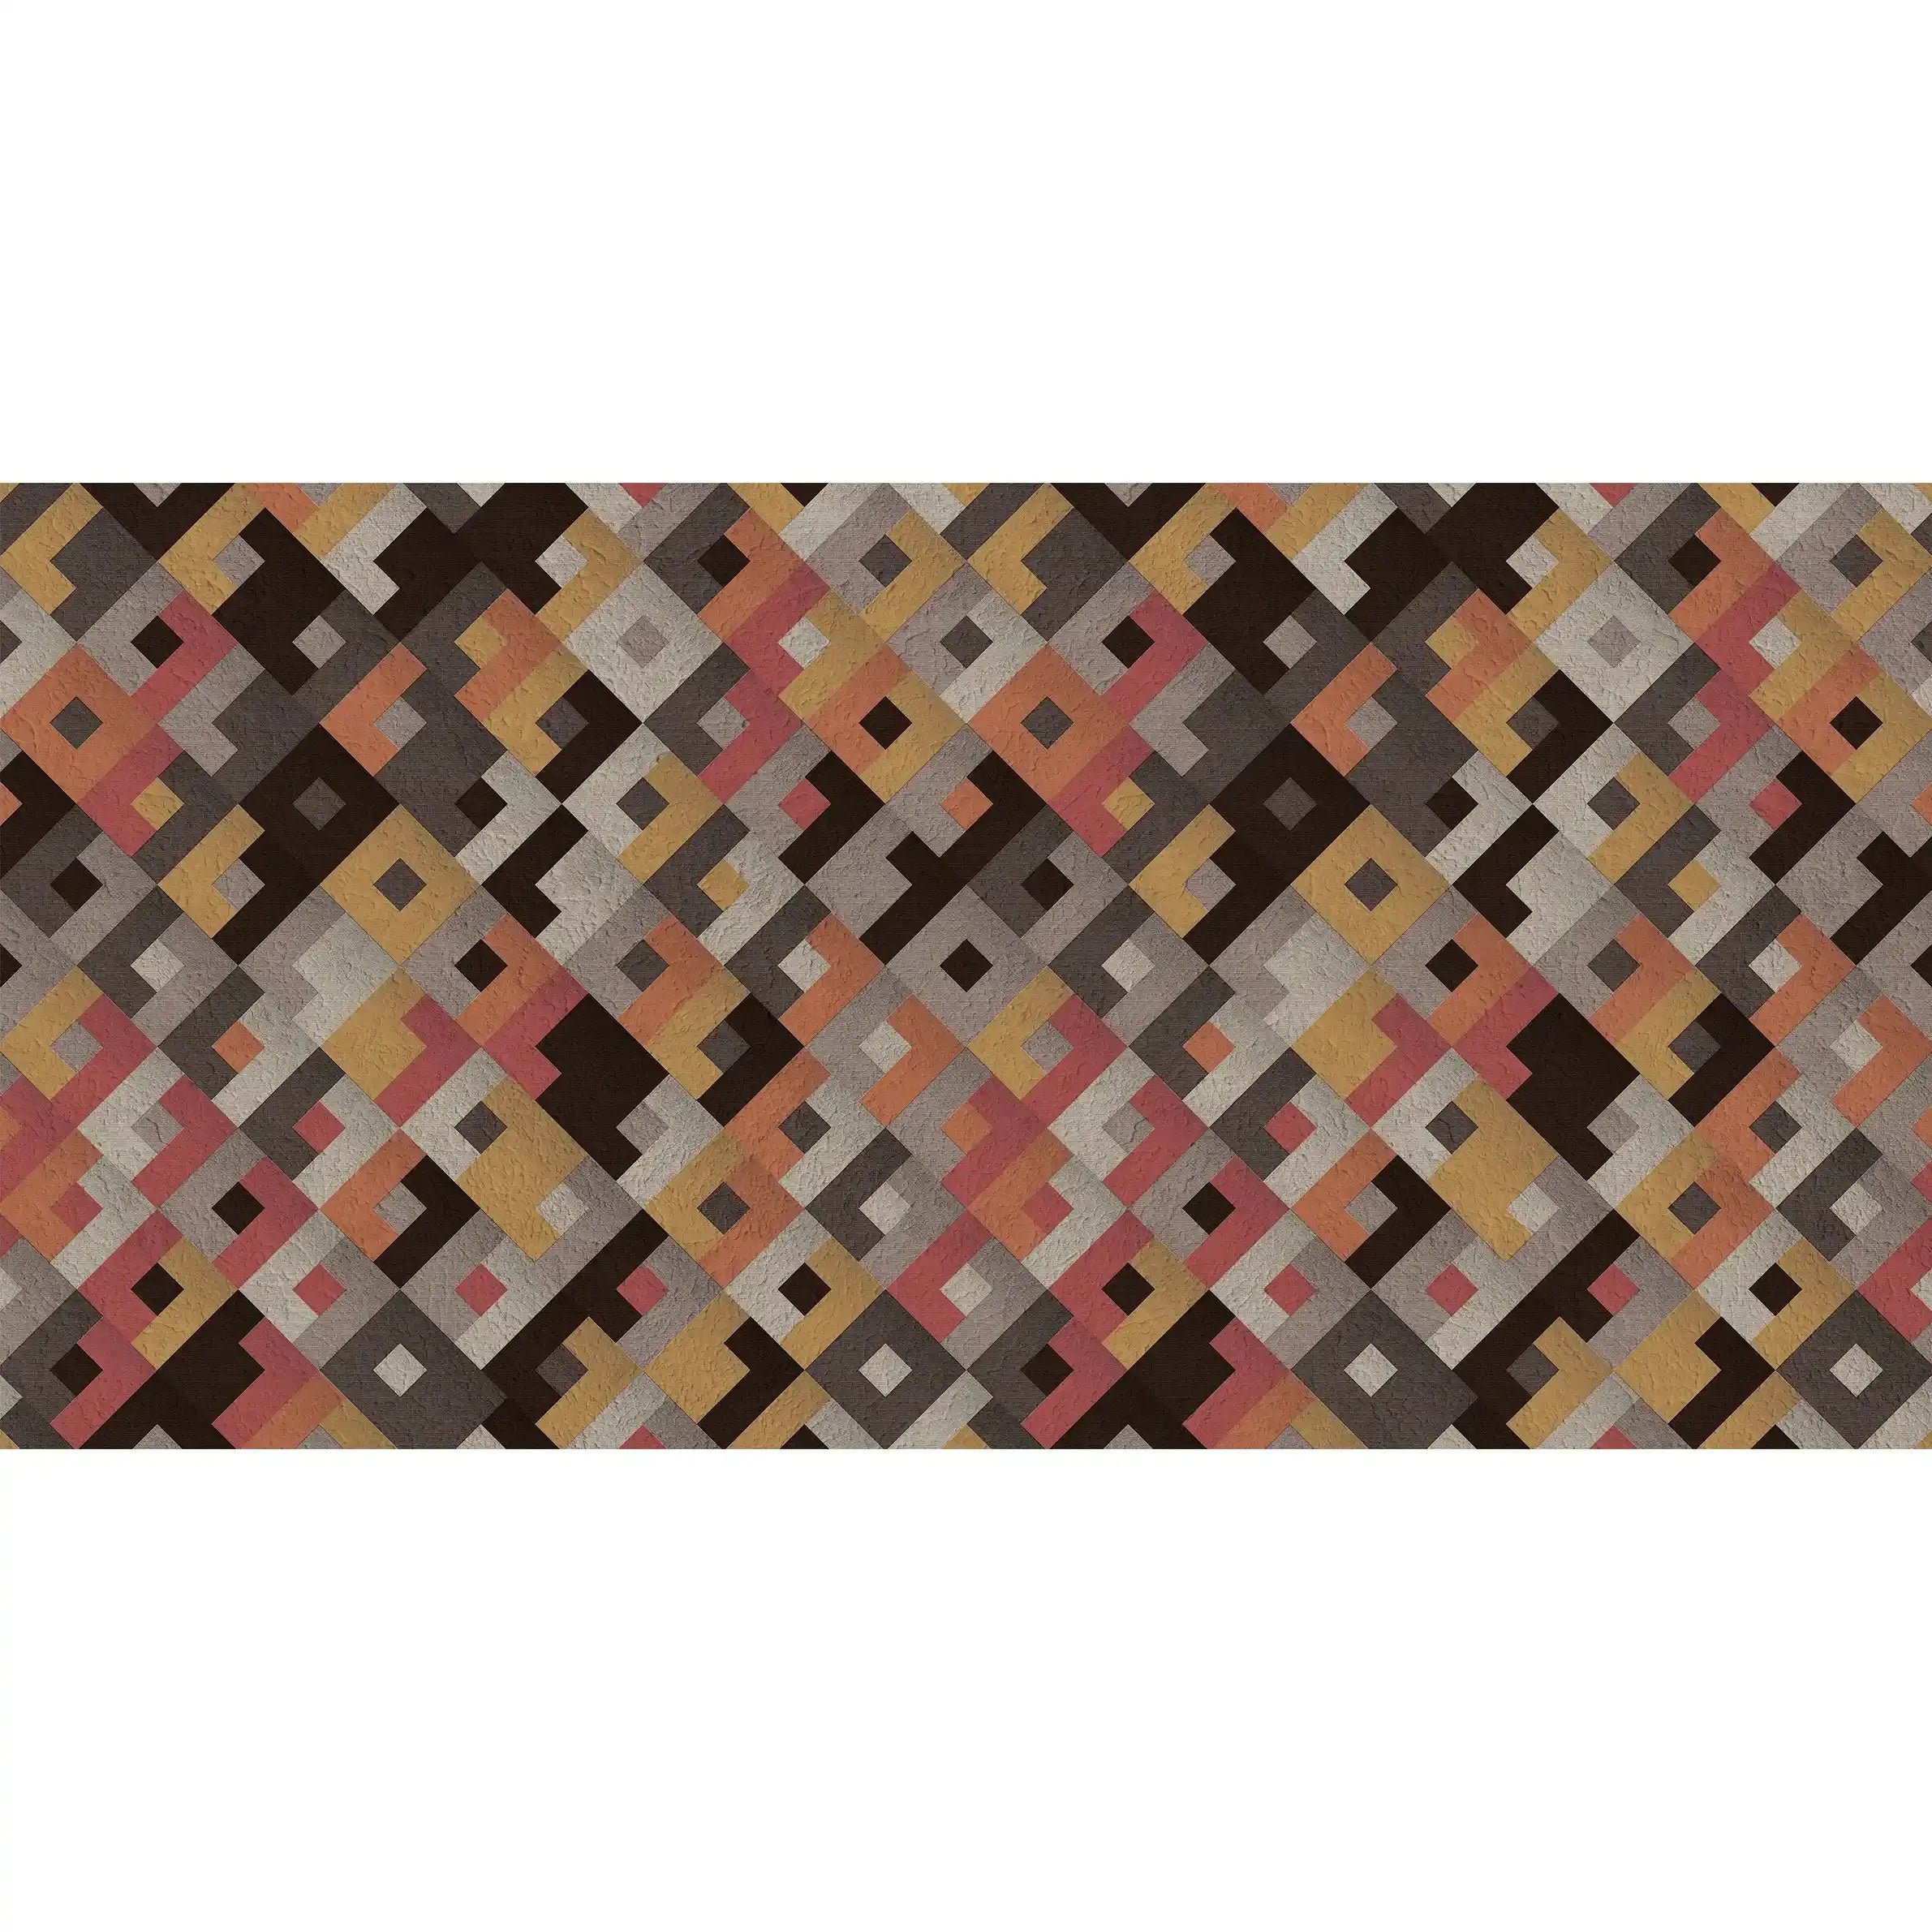 3064-B / Colorful Geometric Pattern Wallpaper - Peelable, Stickable, Ideal for Modern Wall Decor or Accent Wall - Artevella